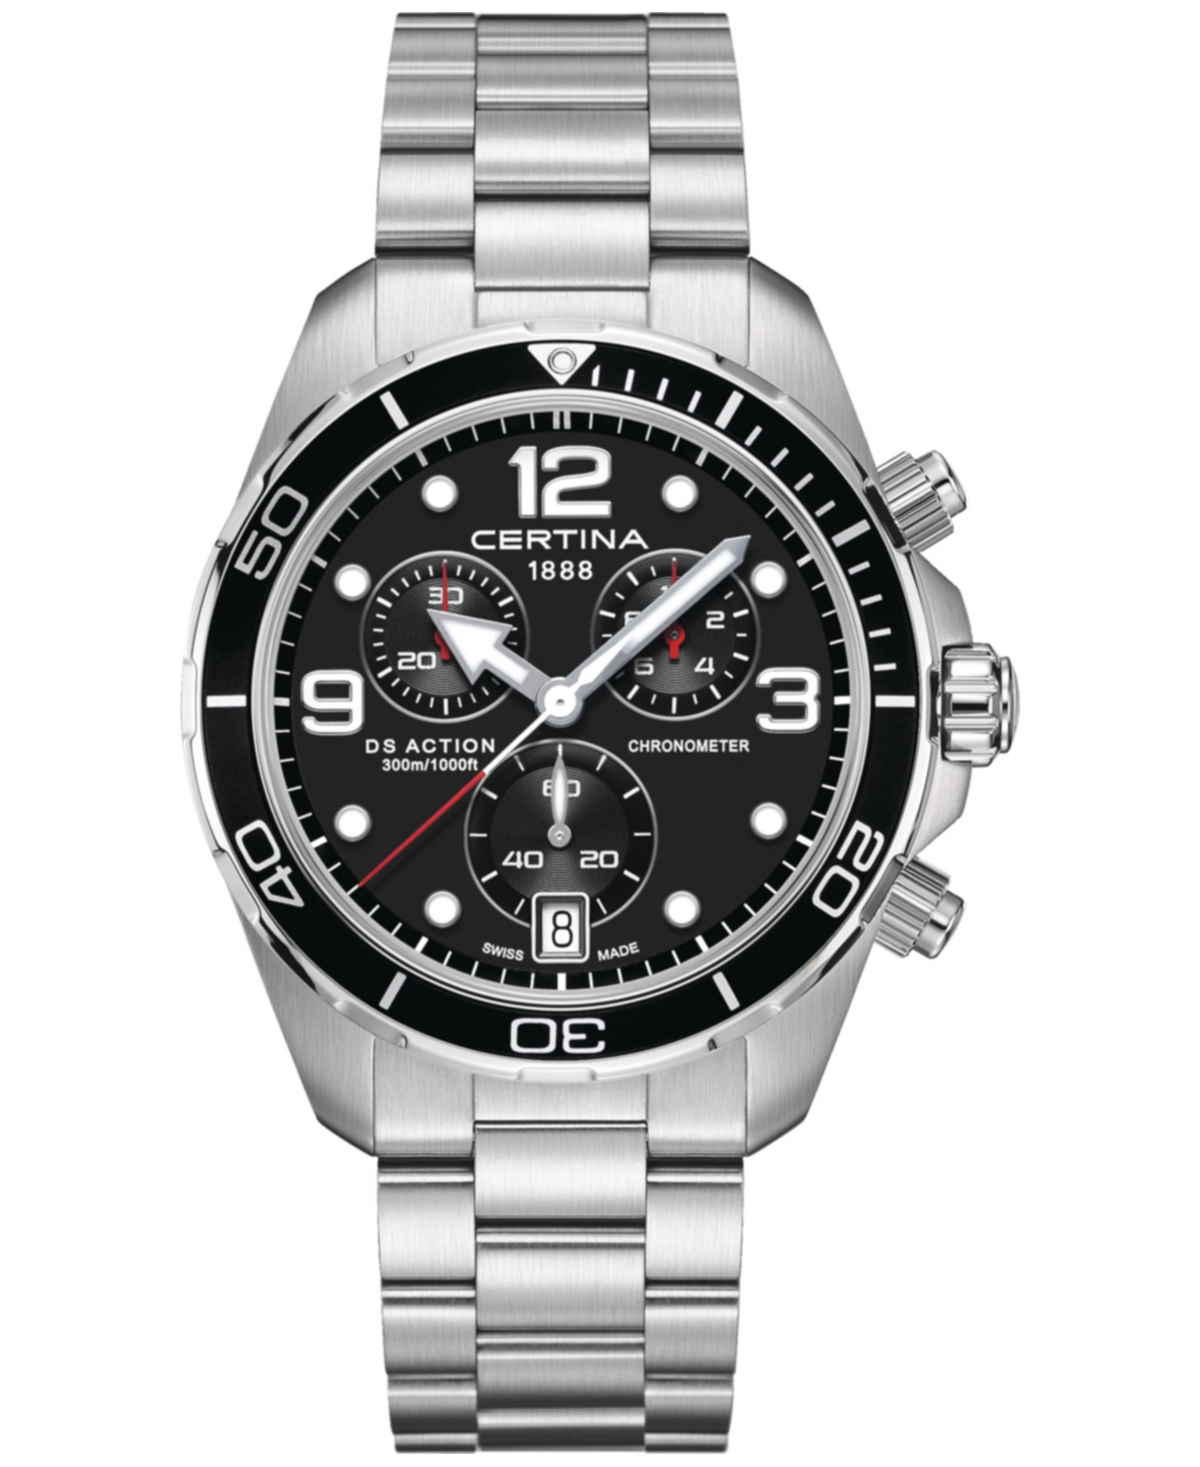 Certina Men's Swiss Chronograph Ds Action Stainless Steel Bracelet Watch 43mm In Black